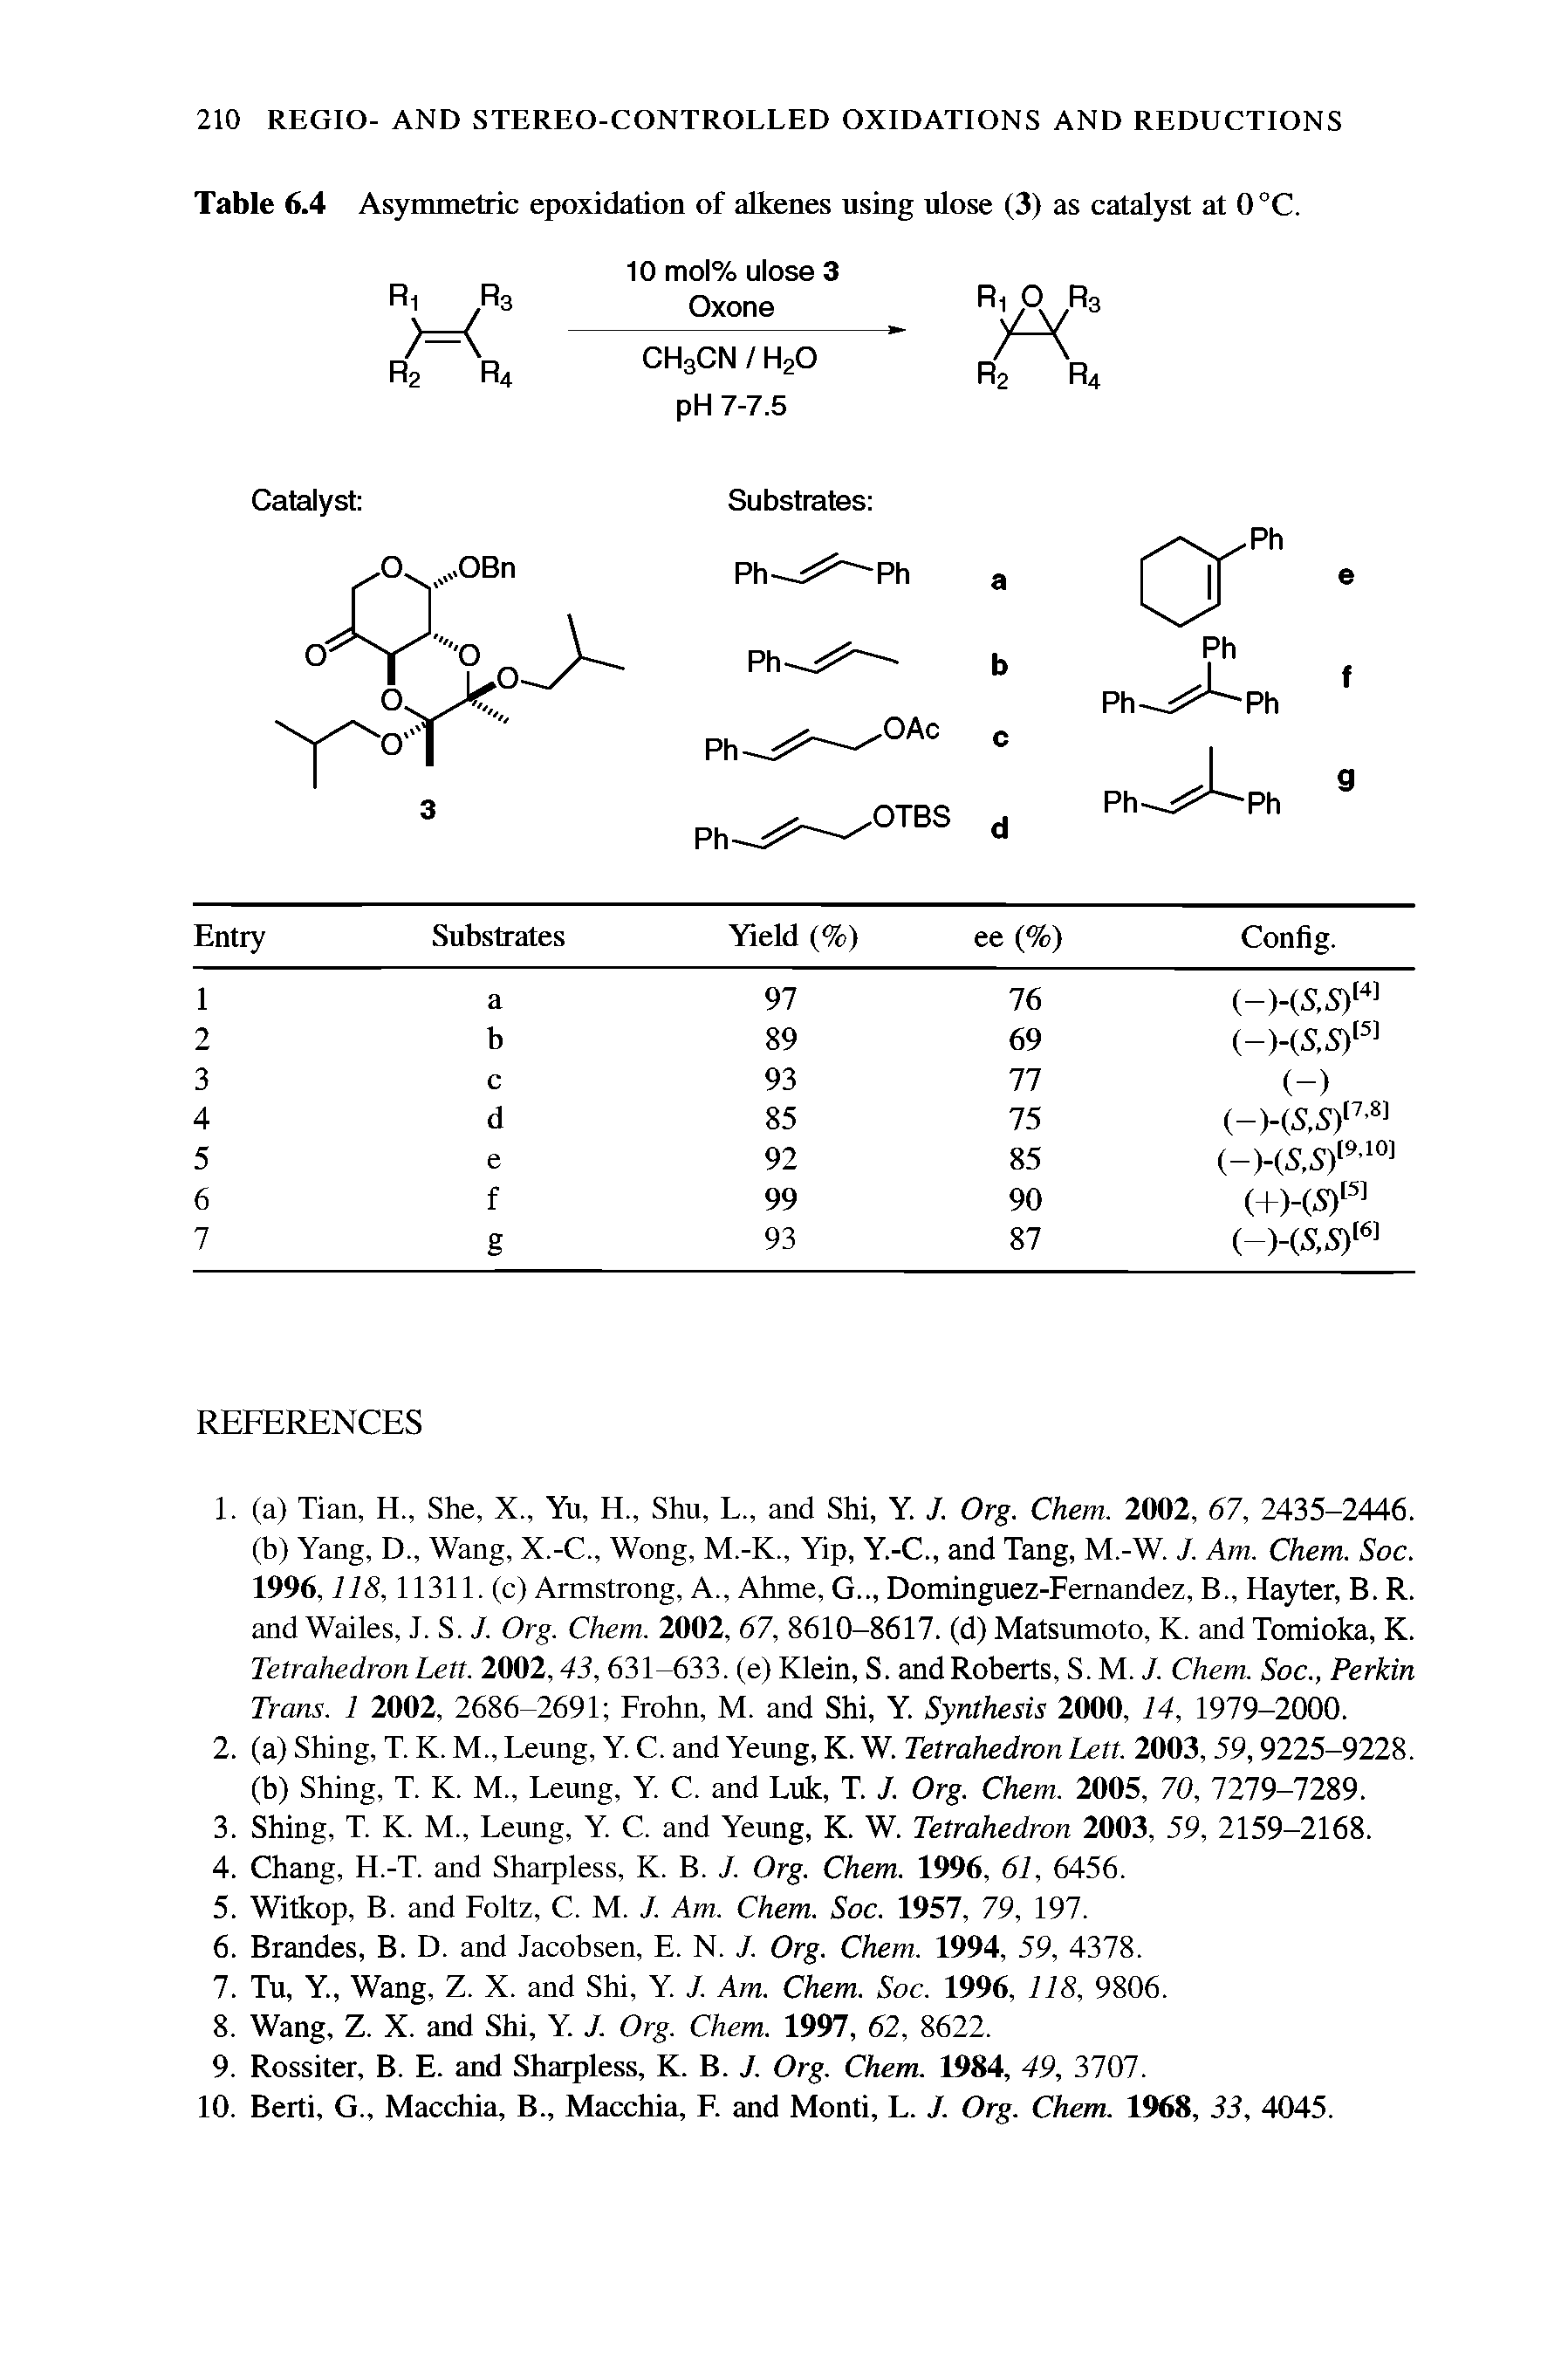 Table 6.4 Asymmetric epoxidation of alkenes using ulose (3) as catalyst at 0 C.